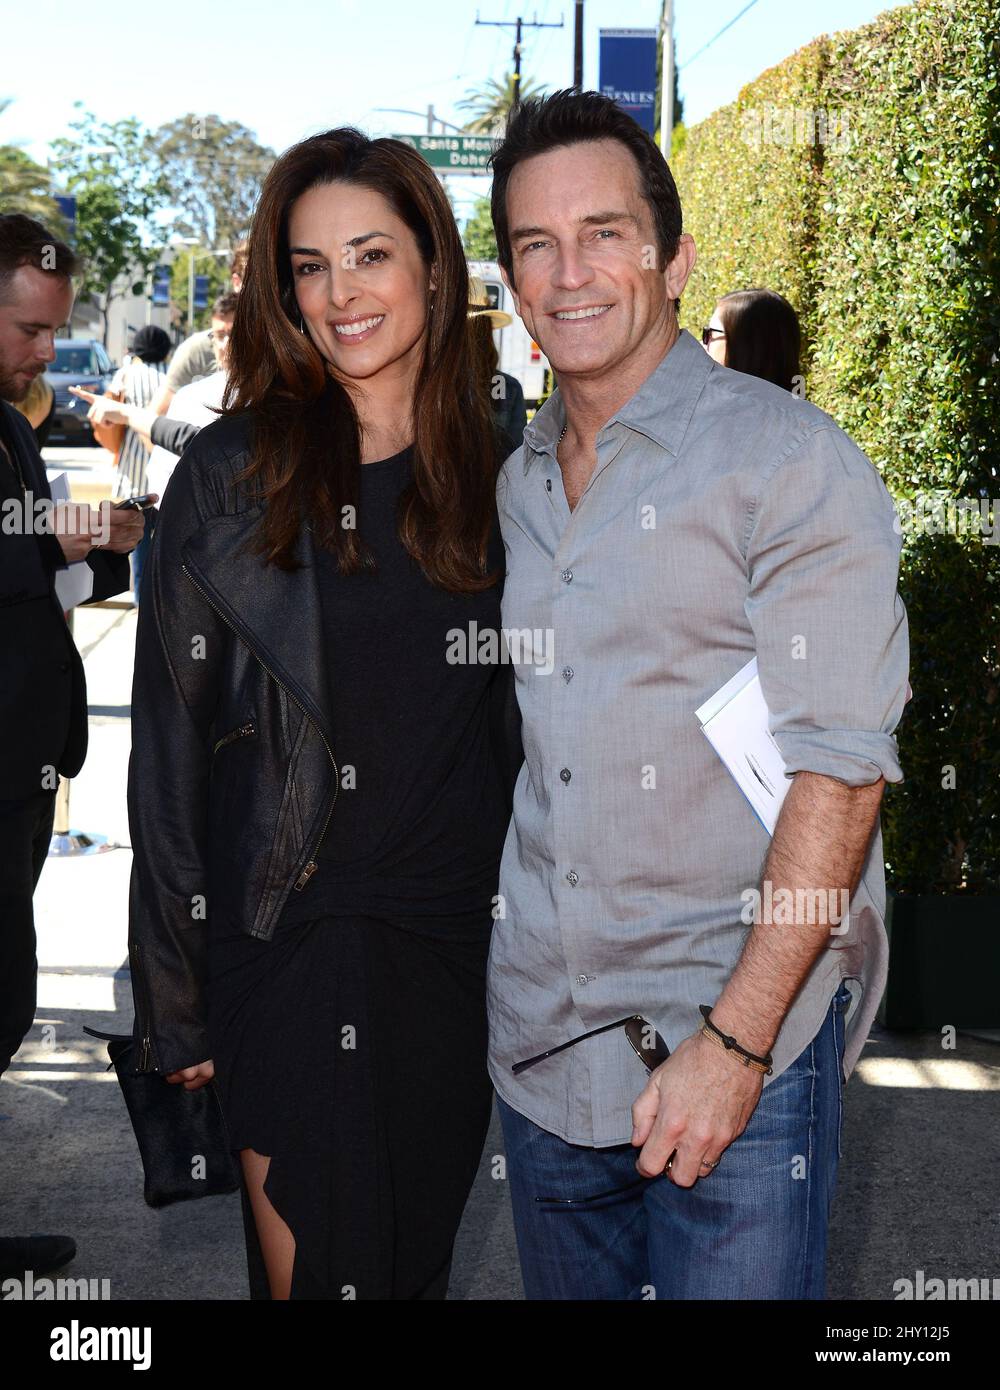 Jeff Probst and Lisa Ann Russell at the John Varvatos 10th Annual Stuart House Benefit, John Varvatos Boutique, West Hollywood, California. Stock Photo